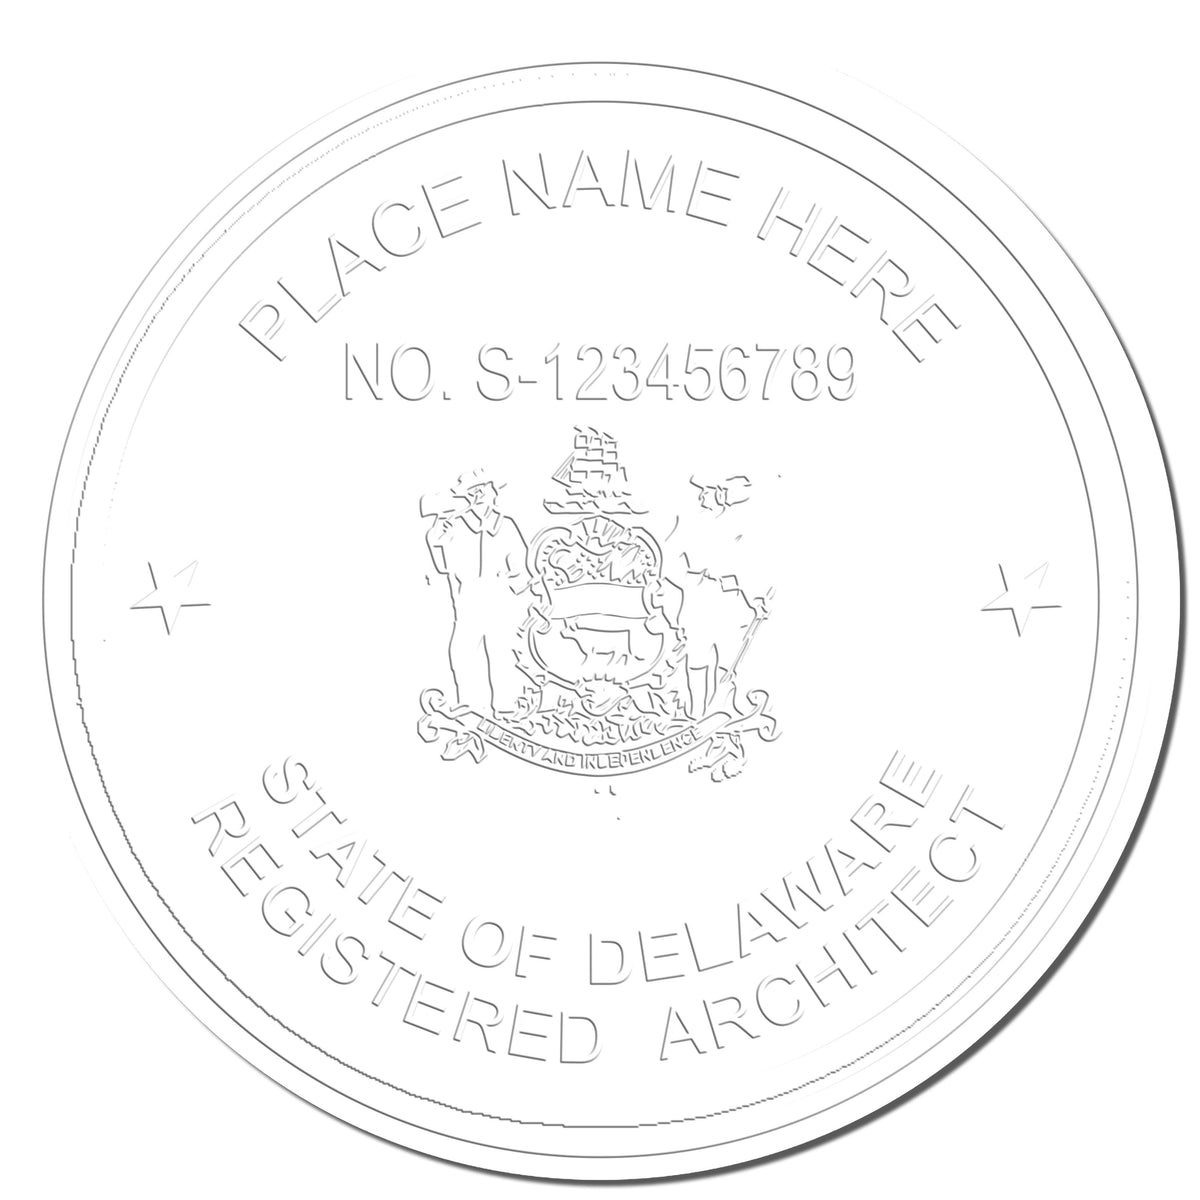 This paper is stamped with a sample imprint of the Gift Delaware Architect Seal, signifying its quality and reliability.